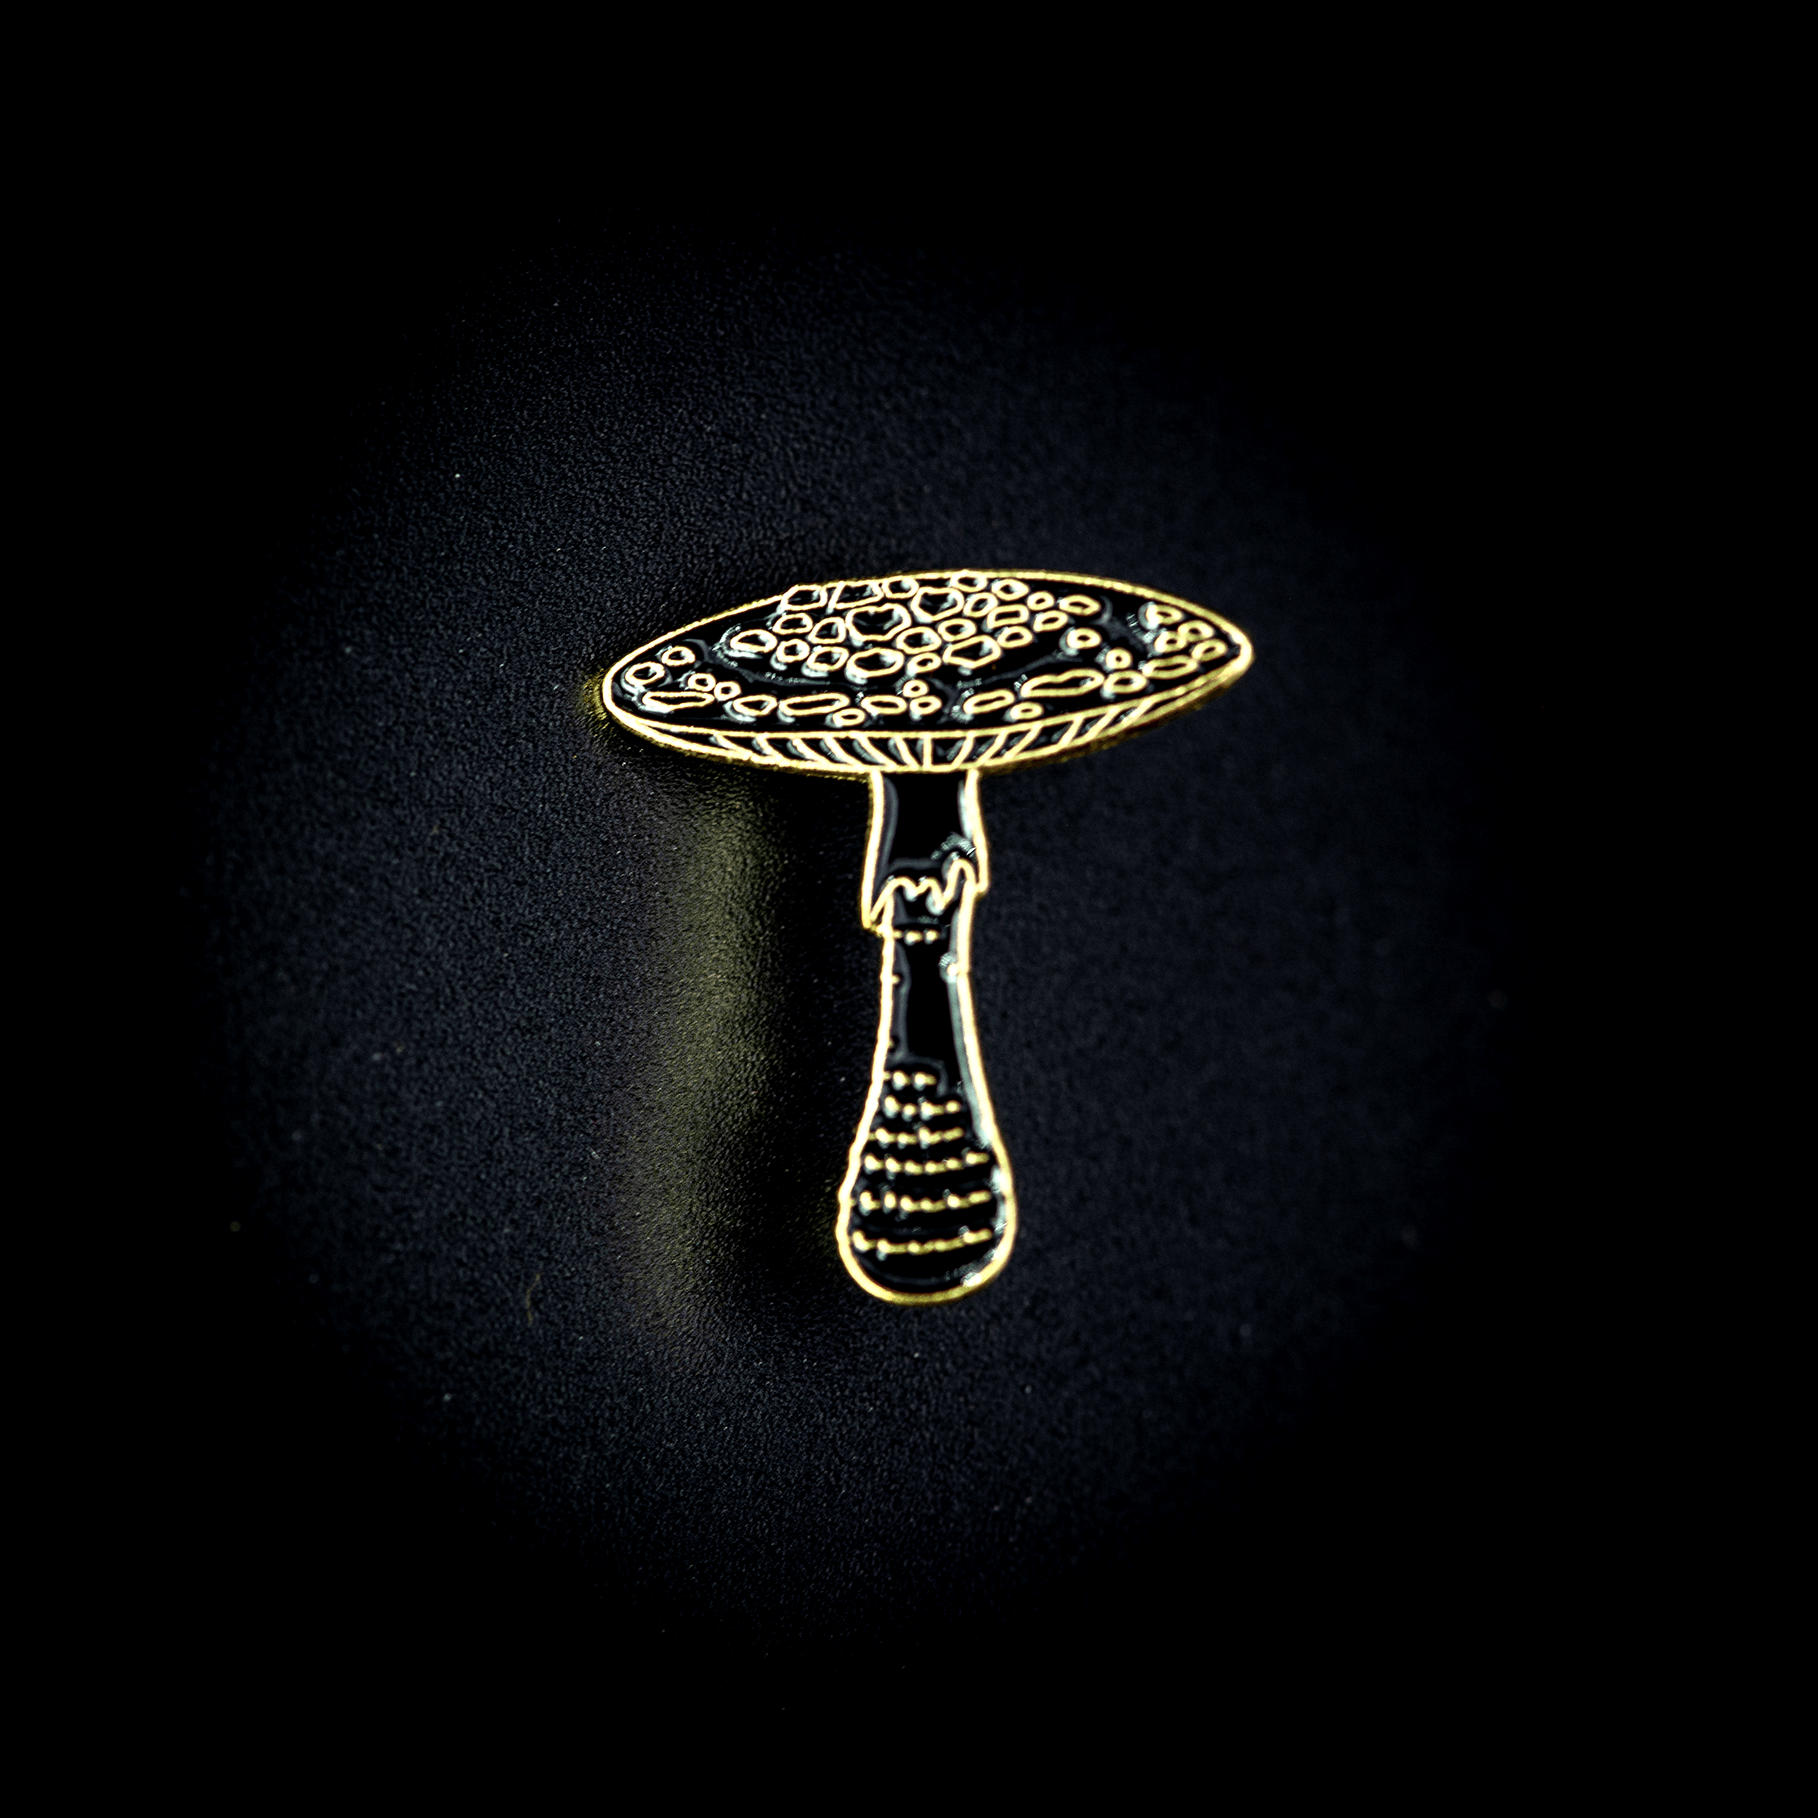 Fantasy Agaric Mushroom Pin - Blackout by The Roving House